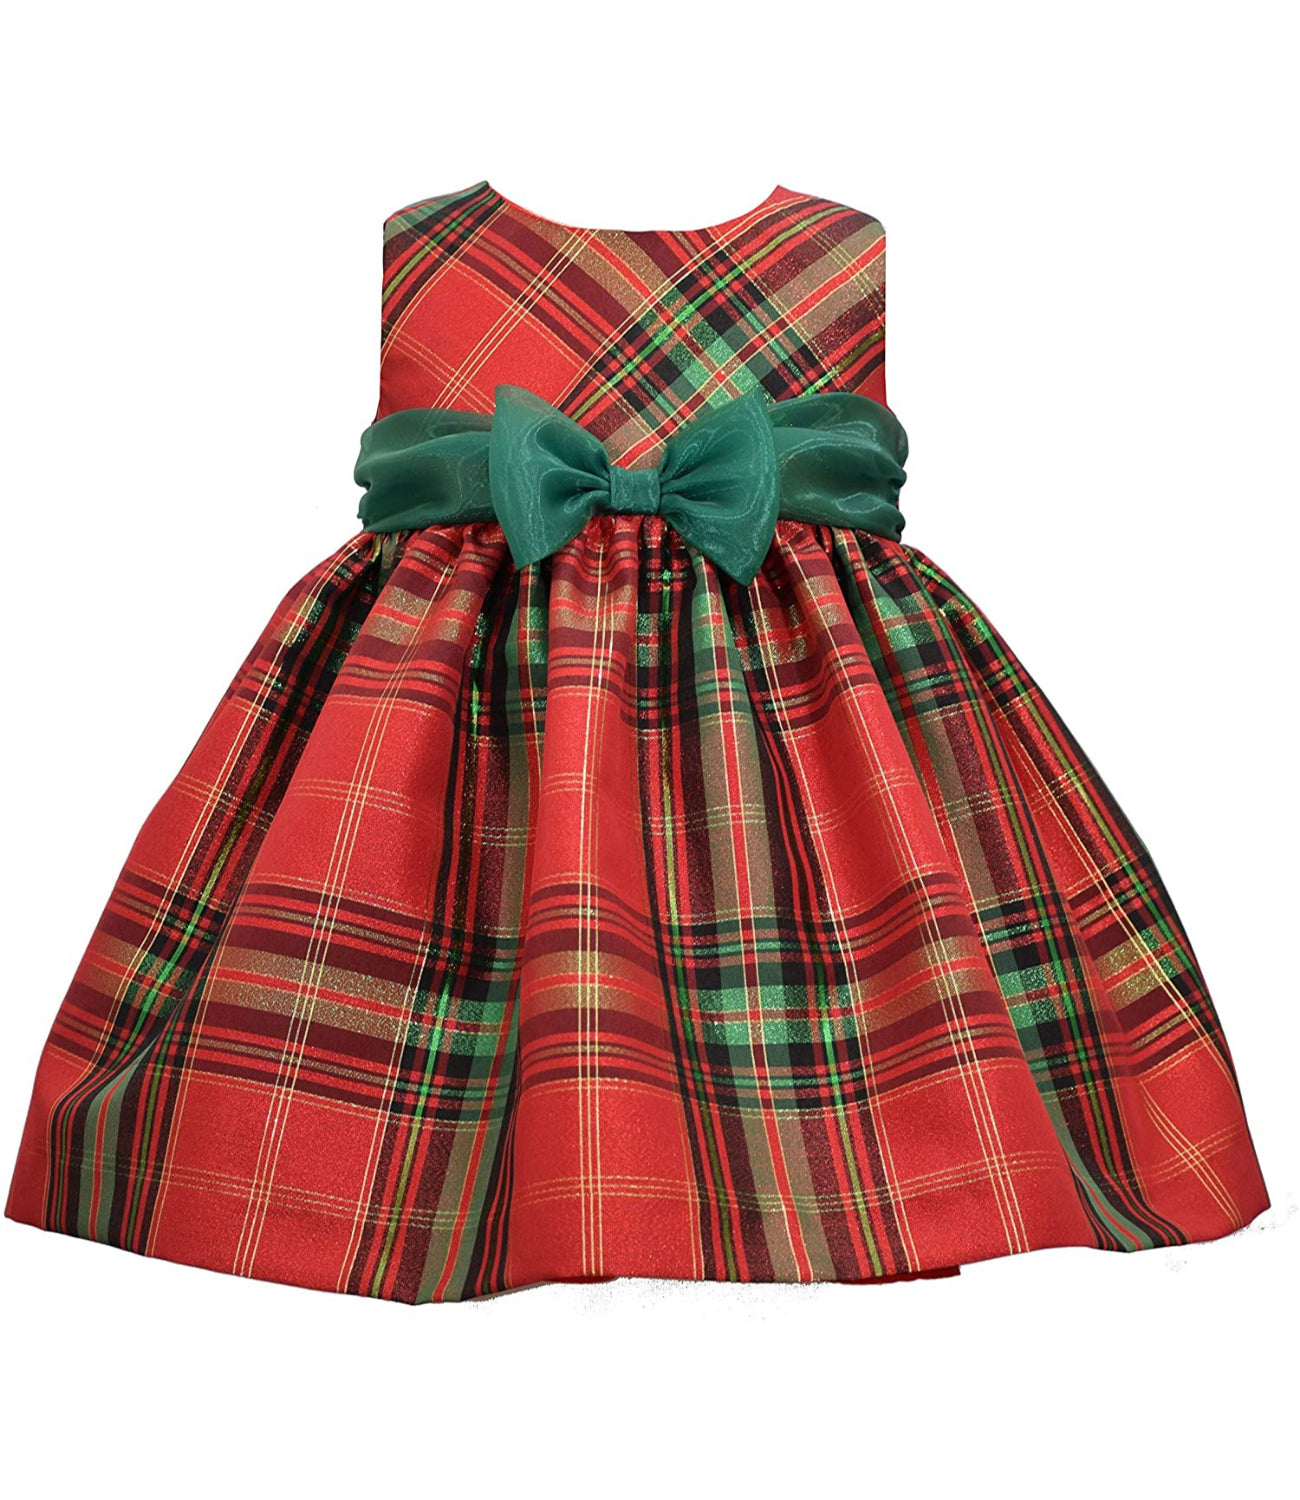 Bonnie Baby Christmas Dress - Plaid with Red Cardigan